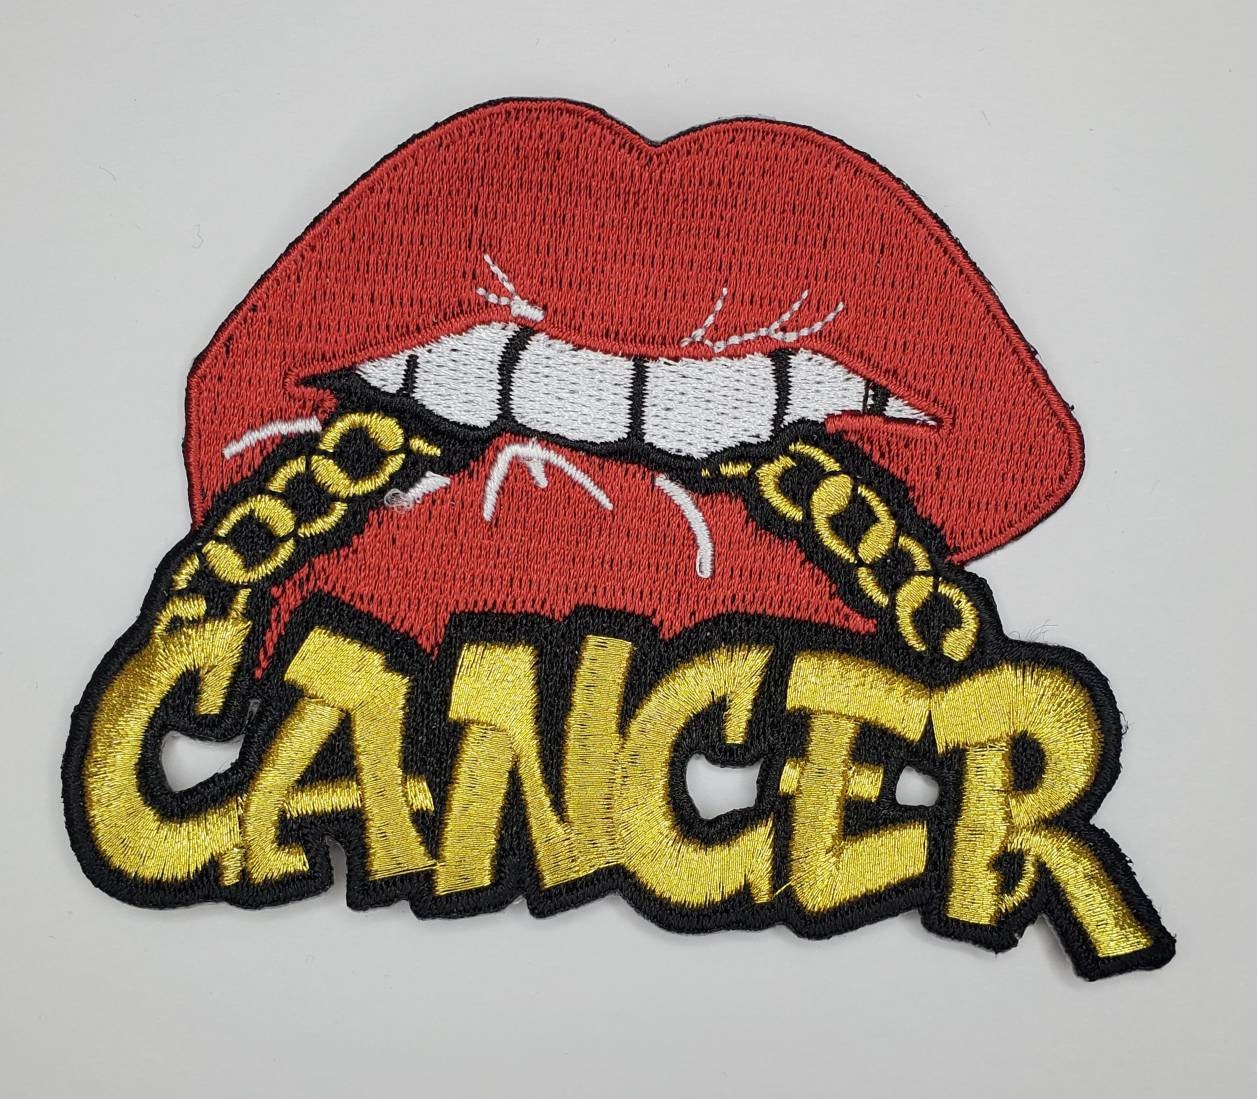 Poppin' Red Lip "Cancer" w/Gold Metallic Chain|Iron-On Patch|Astrology Applique|Cool Embroidered Patch|DIY Patch for Denim & Accessories